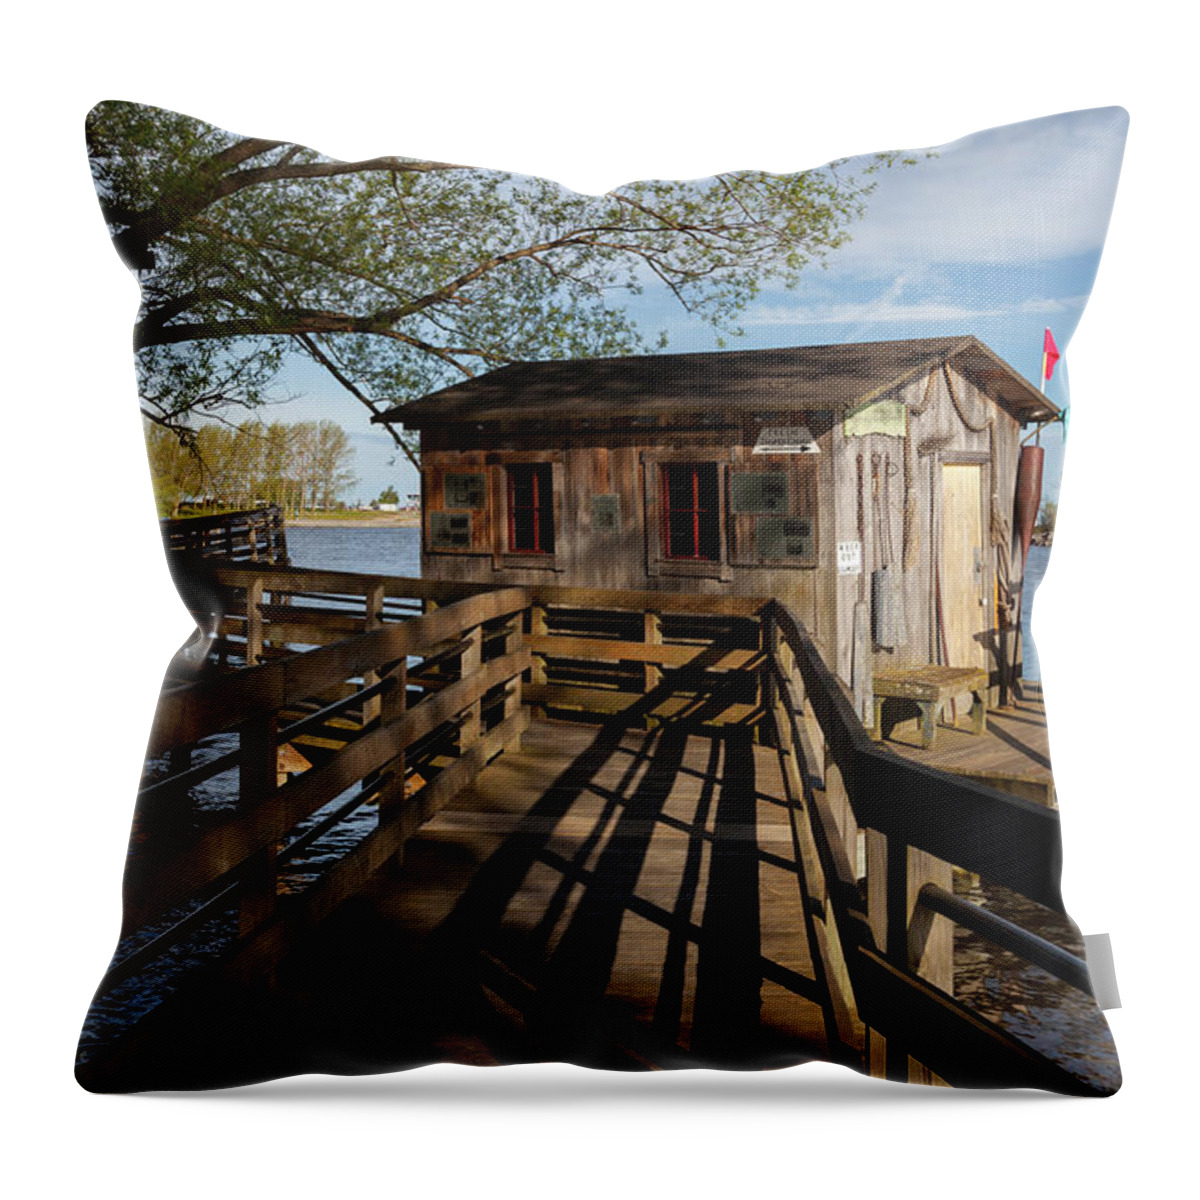 Fish Shack Throw Pillow featuring the photograph Fish Shack by Fran Riley